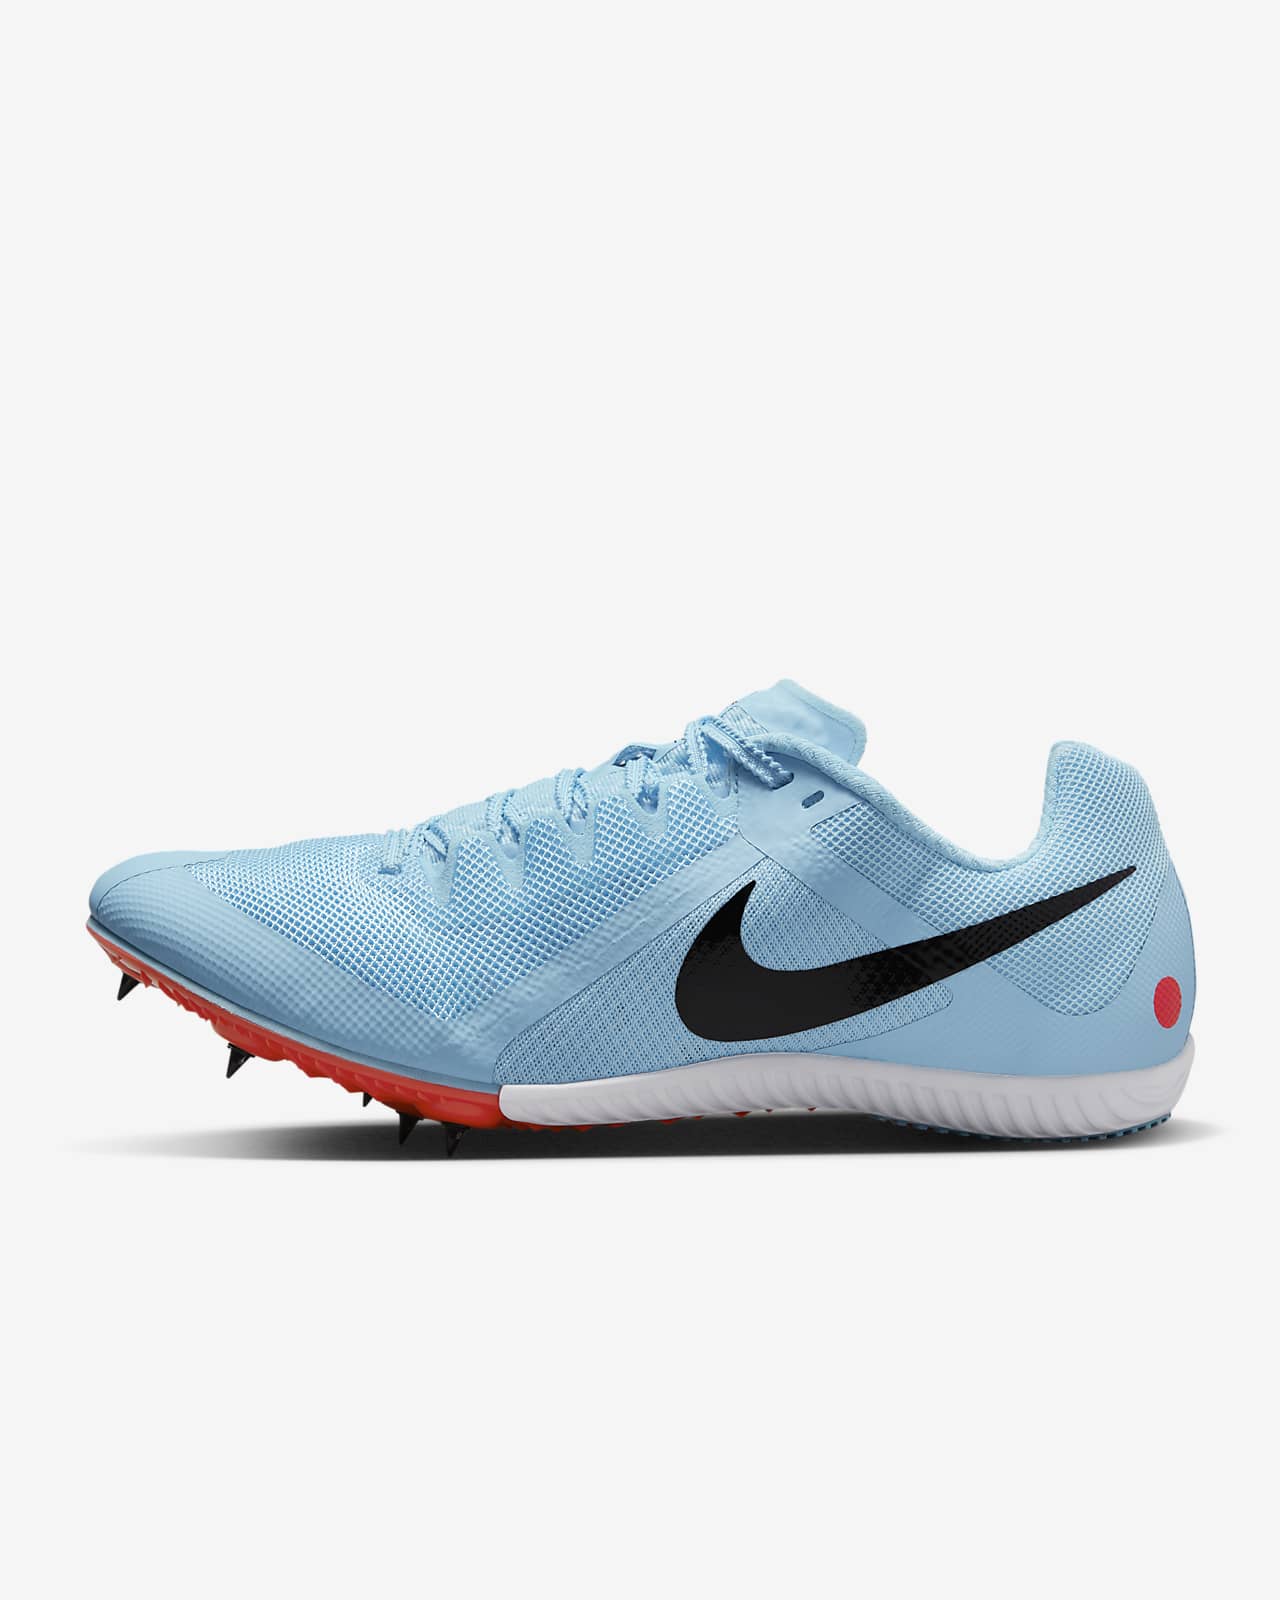 nike rival m track spikes